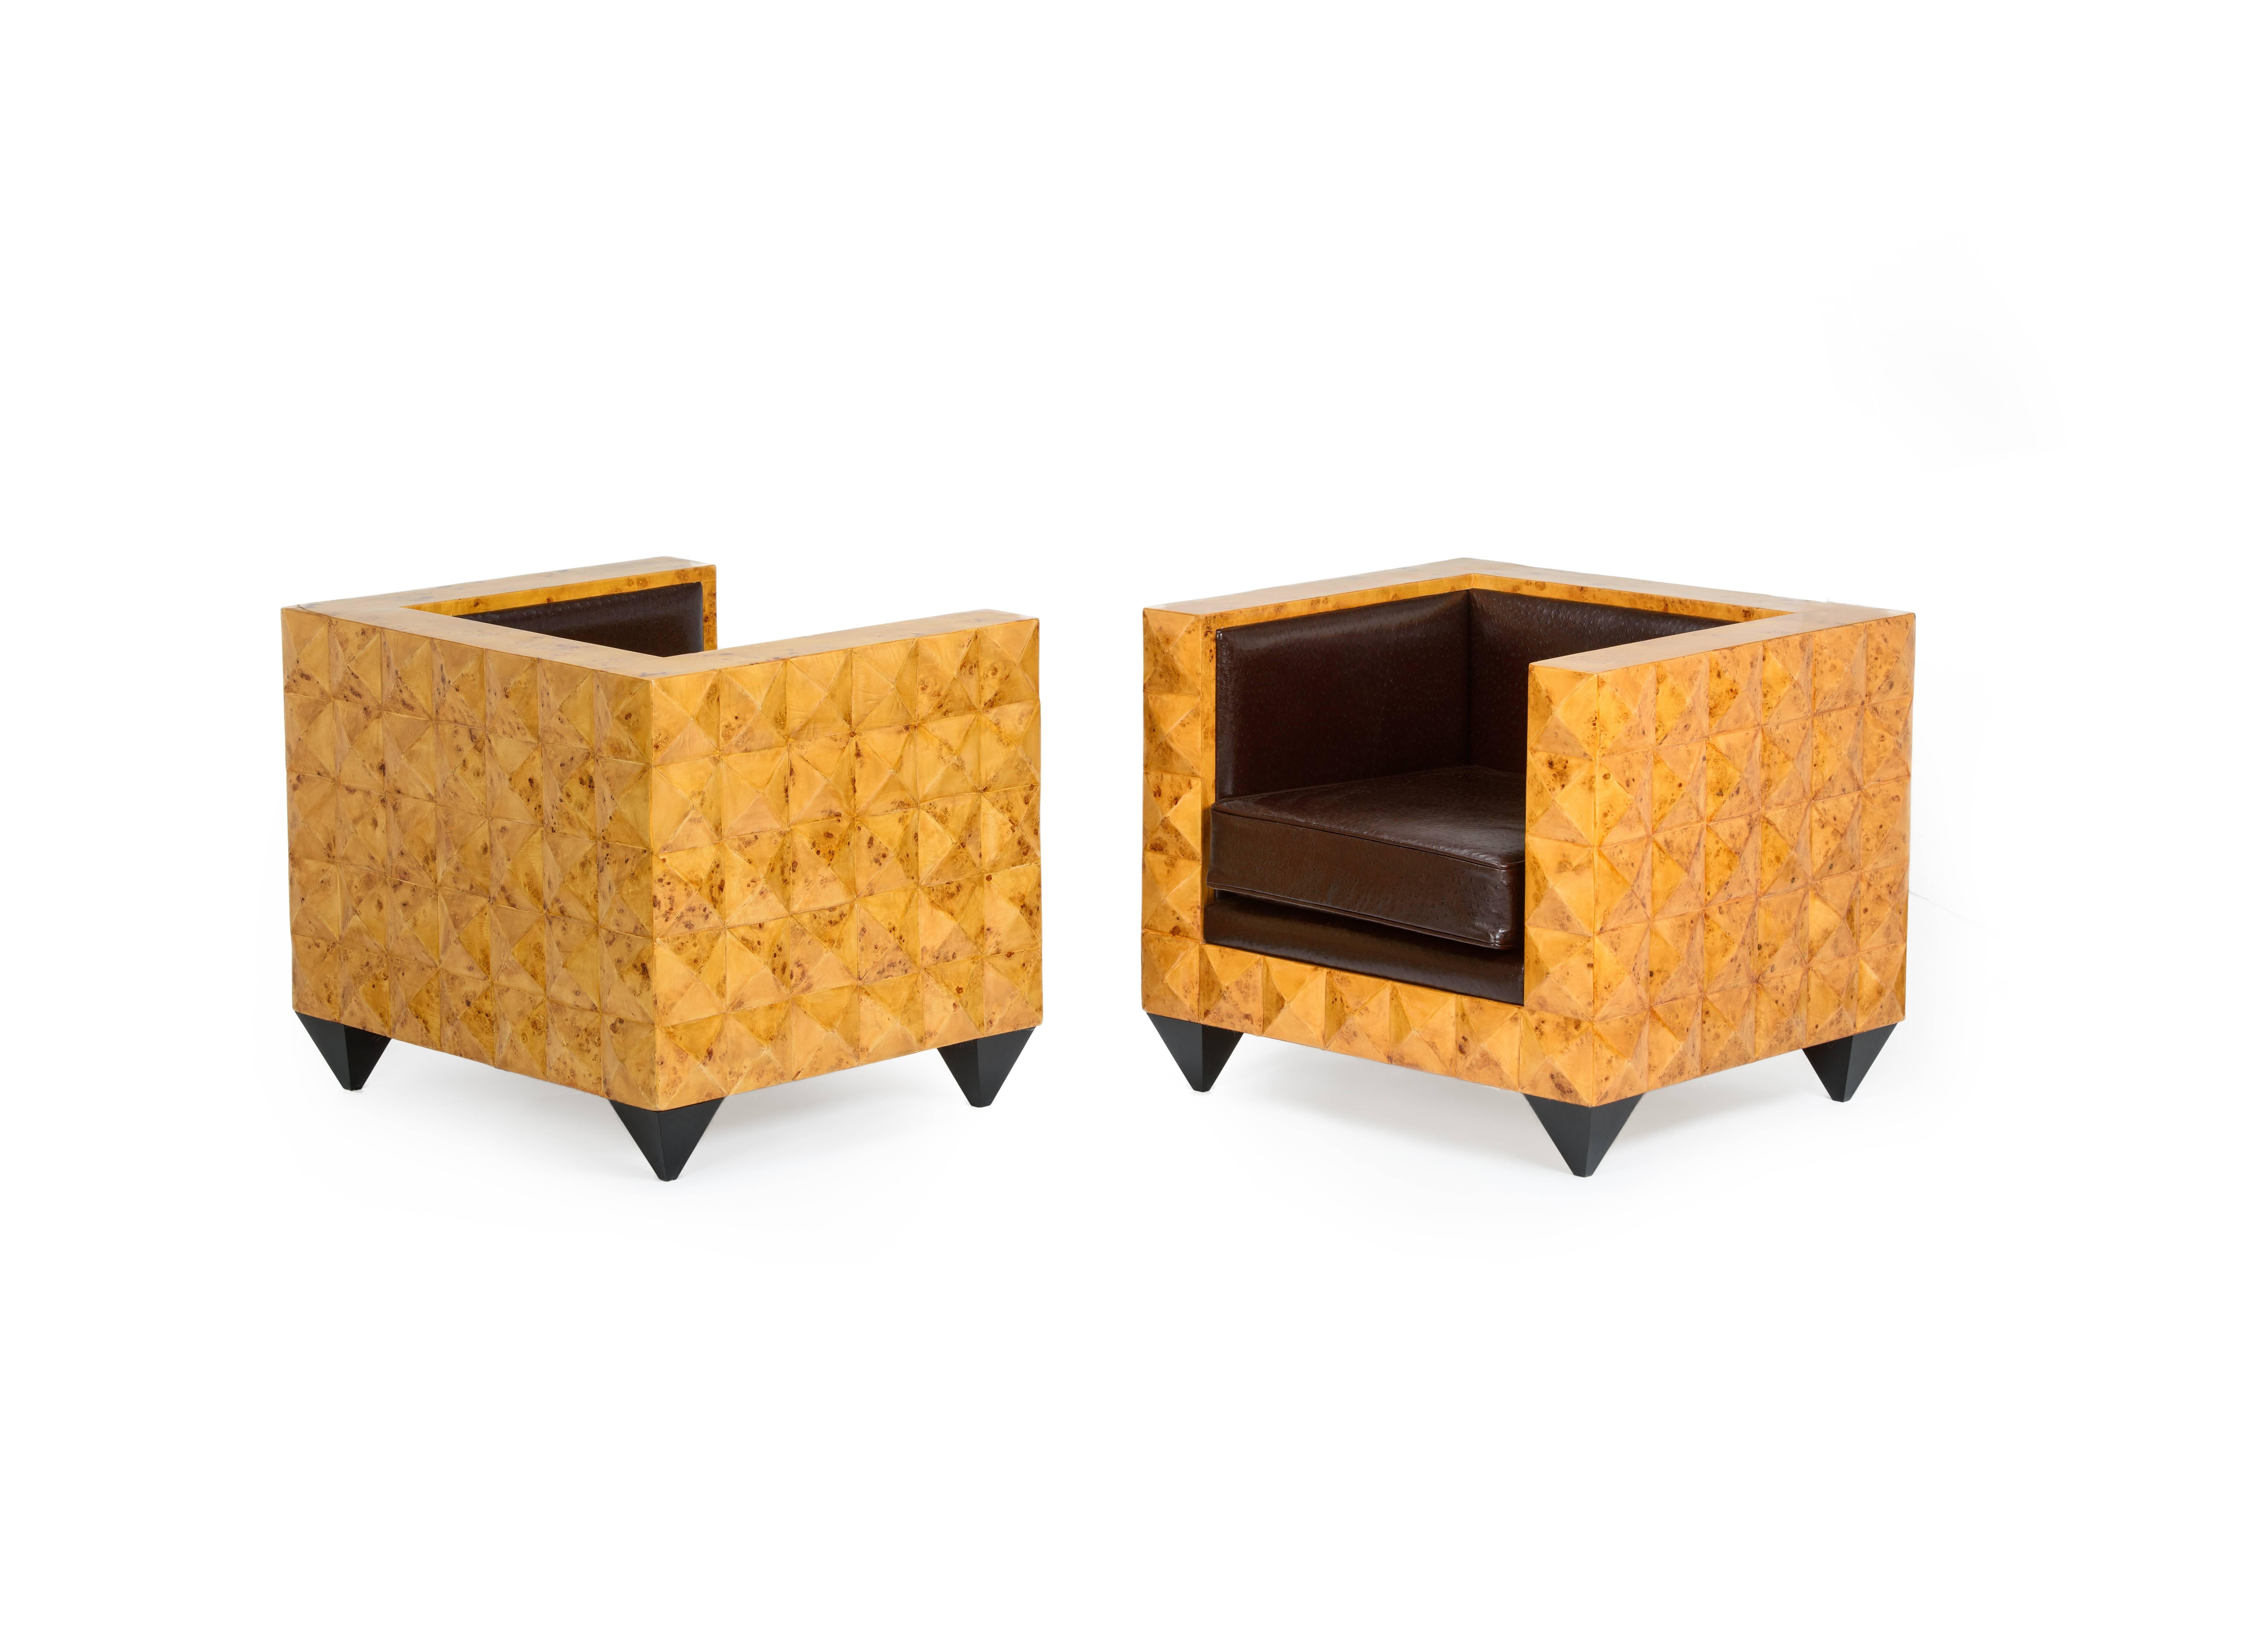 Lacquered Stunning Pair of Unusual Burr Walnut Geometric Pyramid Armchairs. For Sale